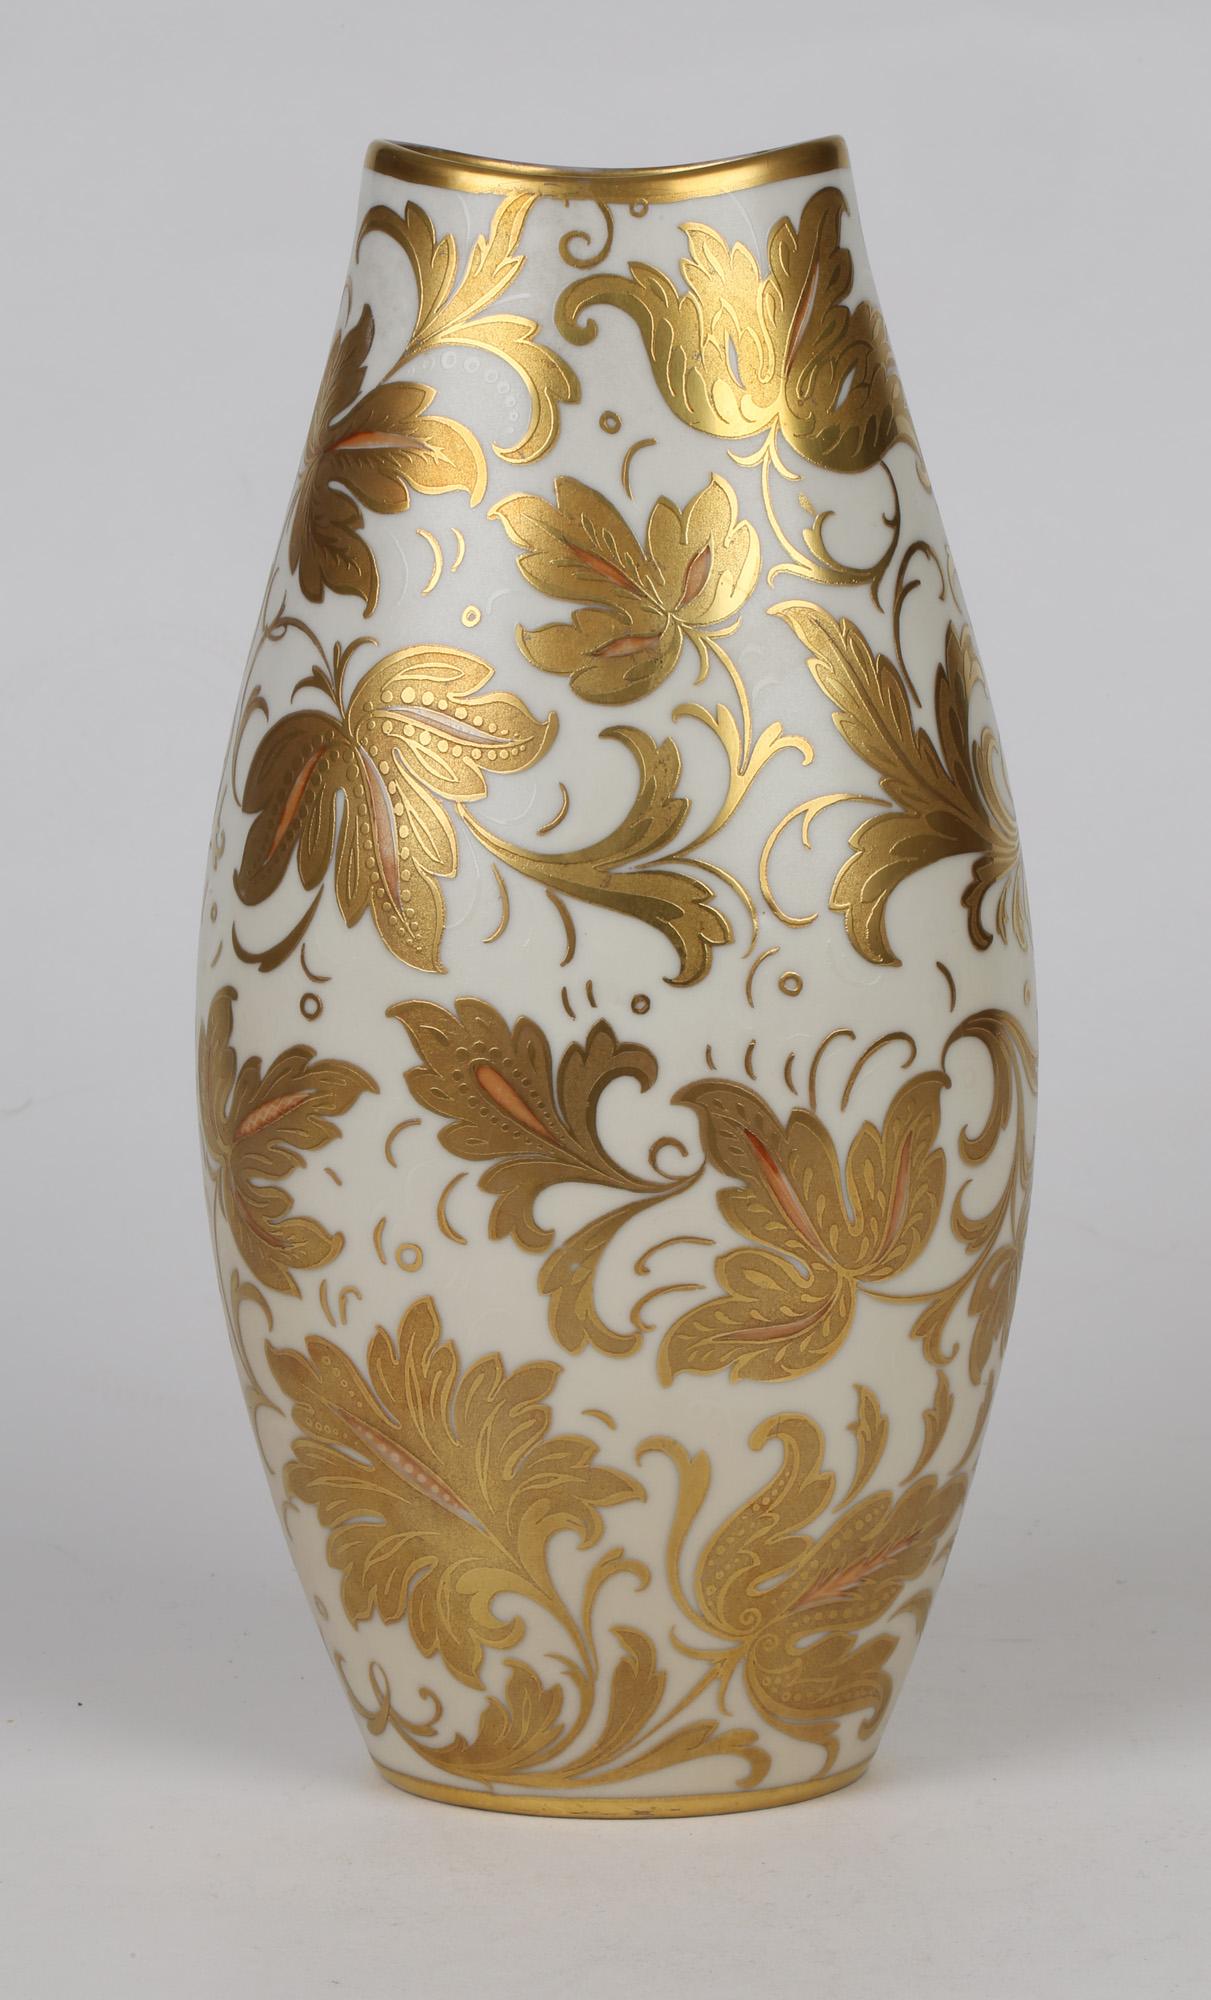 A stunning mid-century Italian Oro Zecchino porcelain vase finely decorated with leaf designs by Arrigo Finzi. This elegantly shaped vase is of slightly compressed oval form standing standing on a narrow oval shaped foot with a fish mouth shaped top